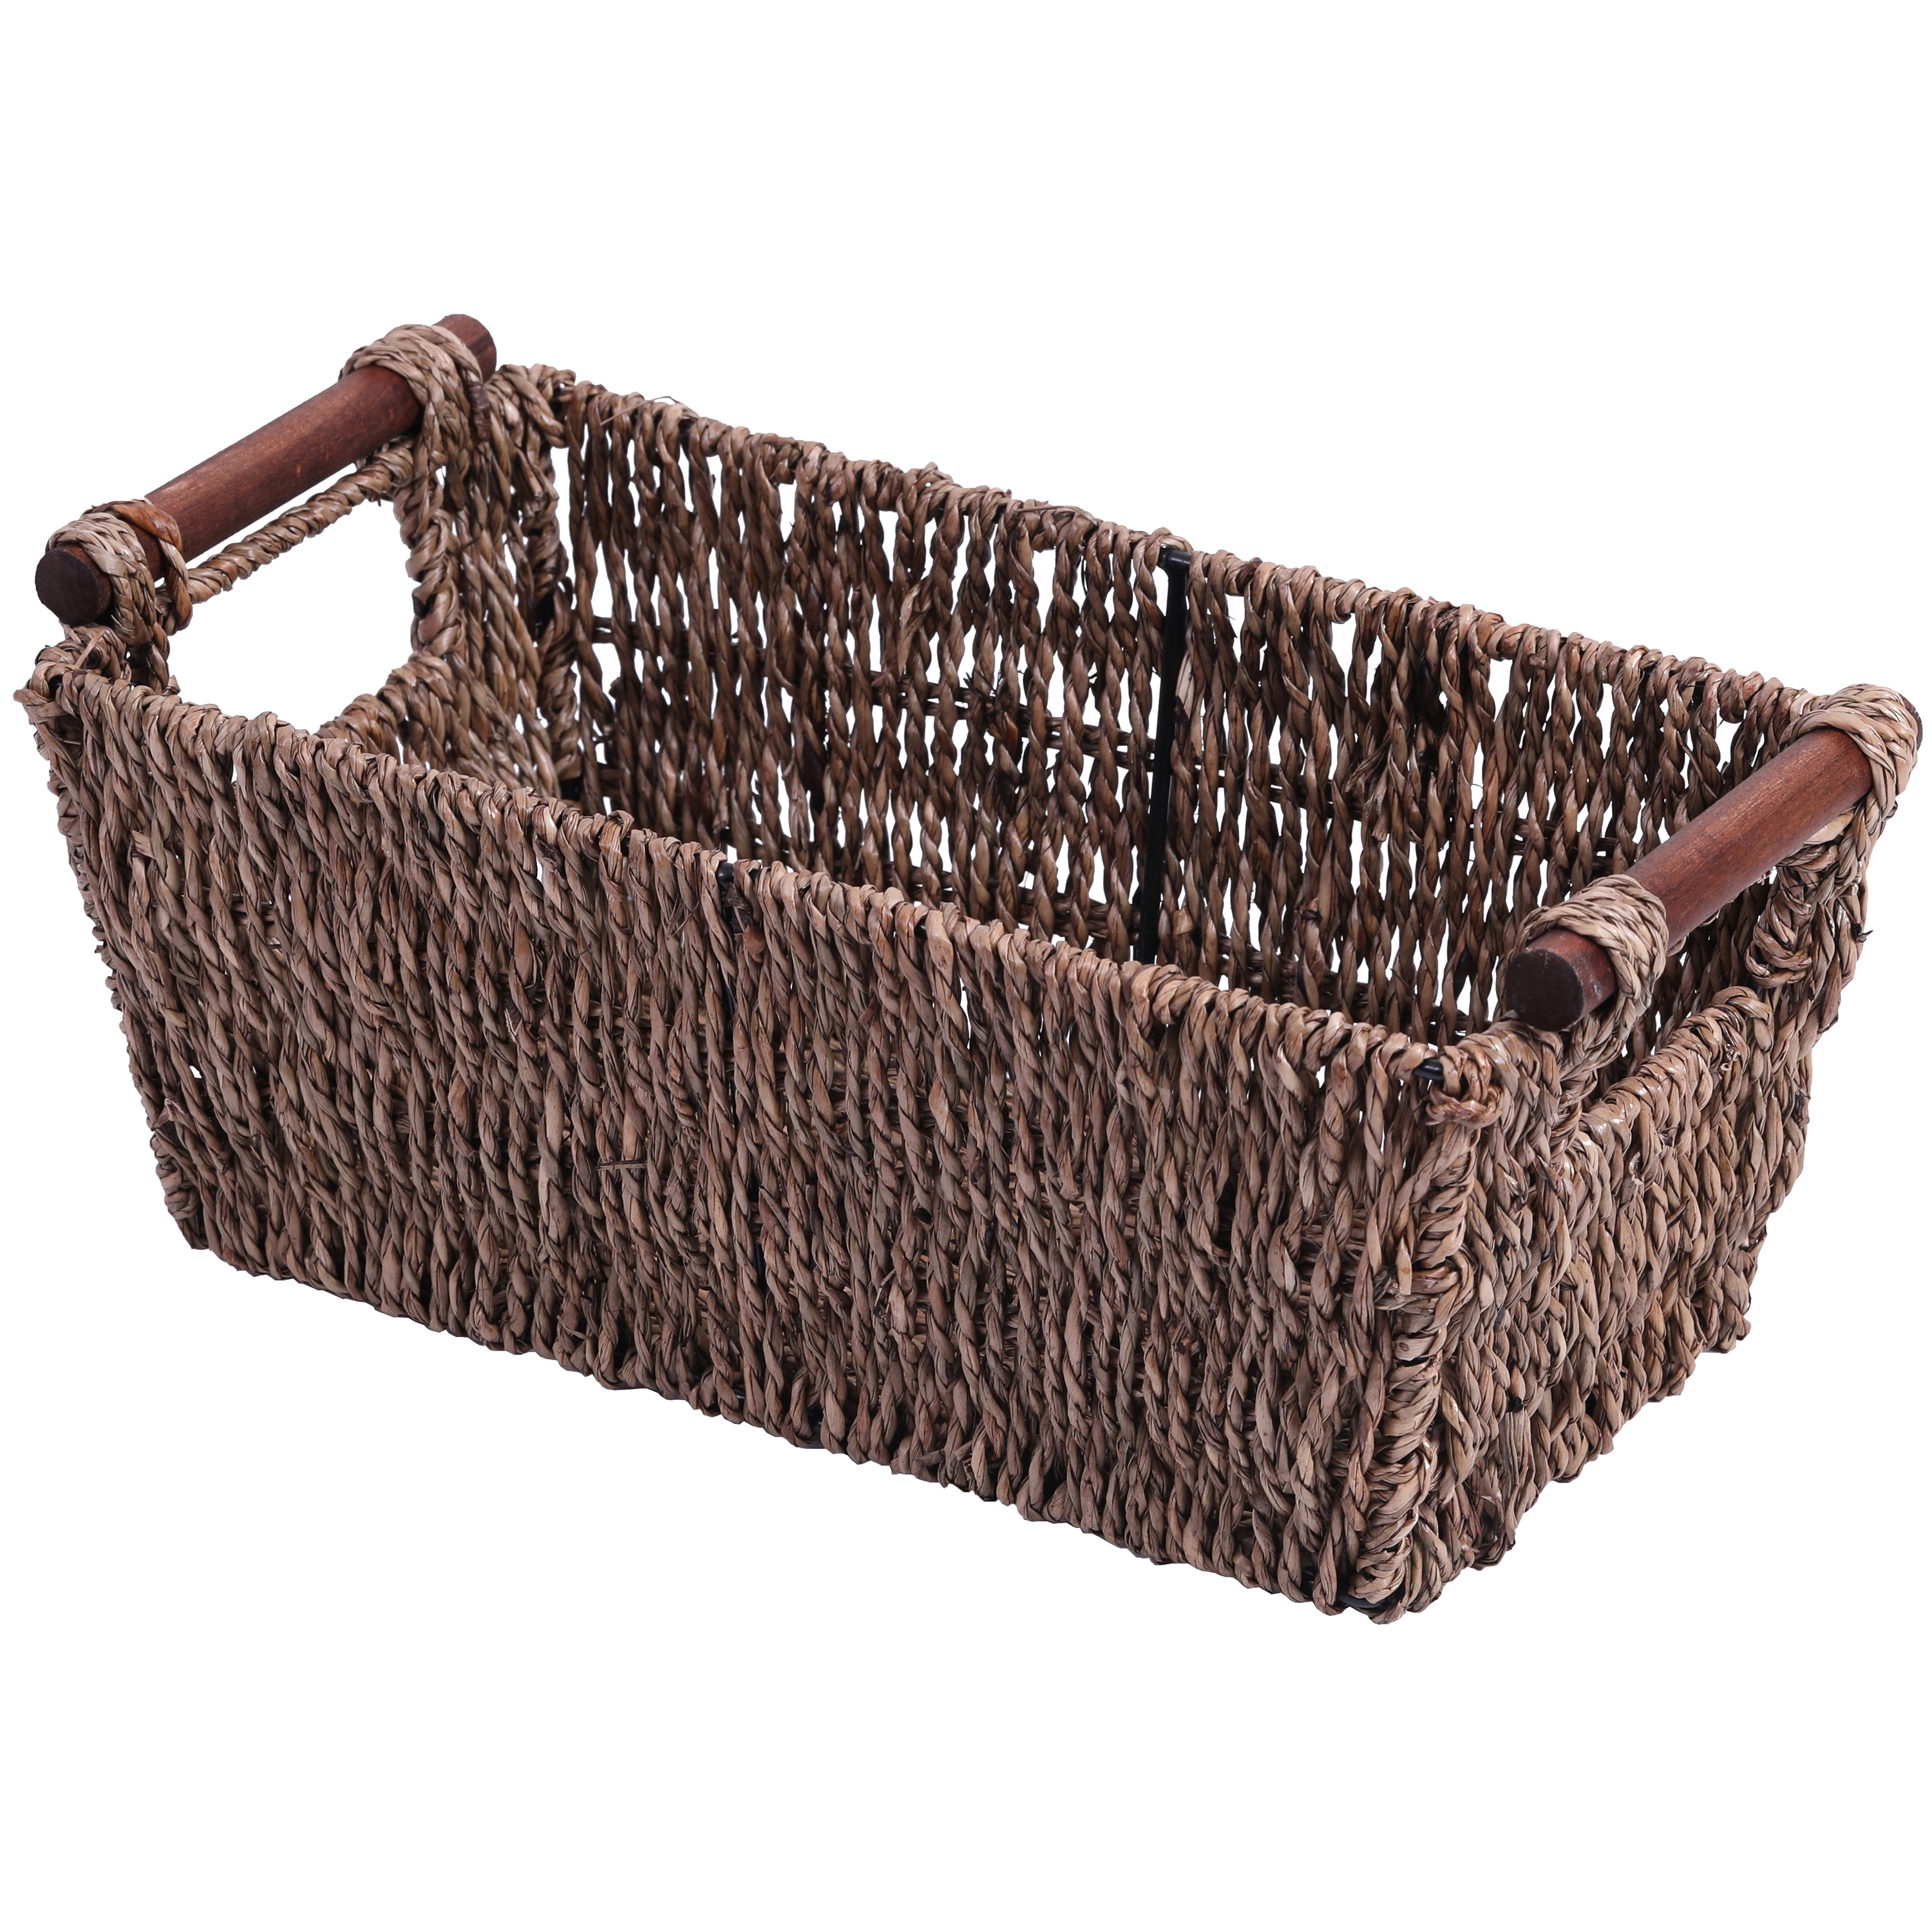 Seagrass Counter-Top Basket Great For Folded Paper Towel